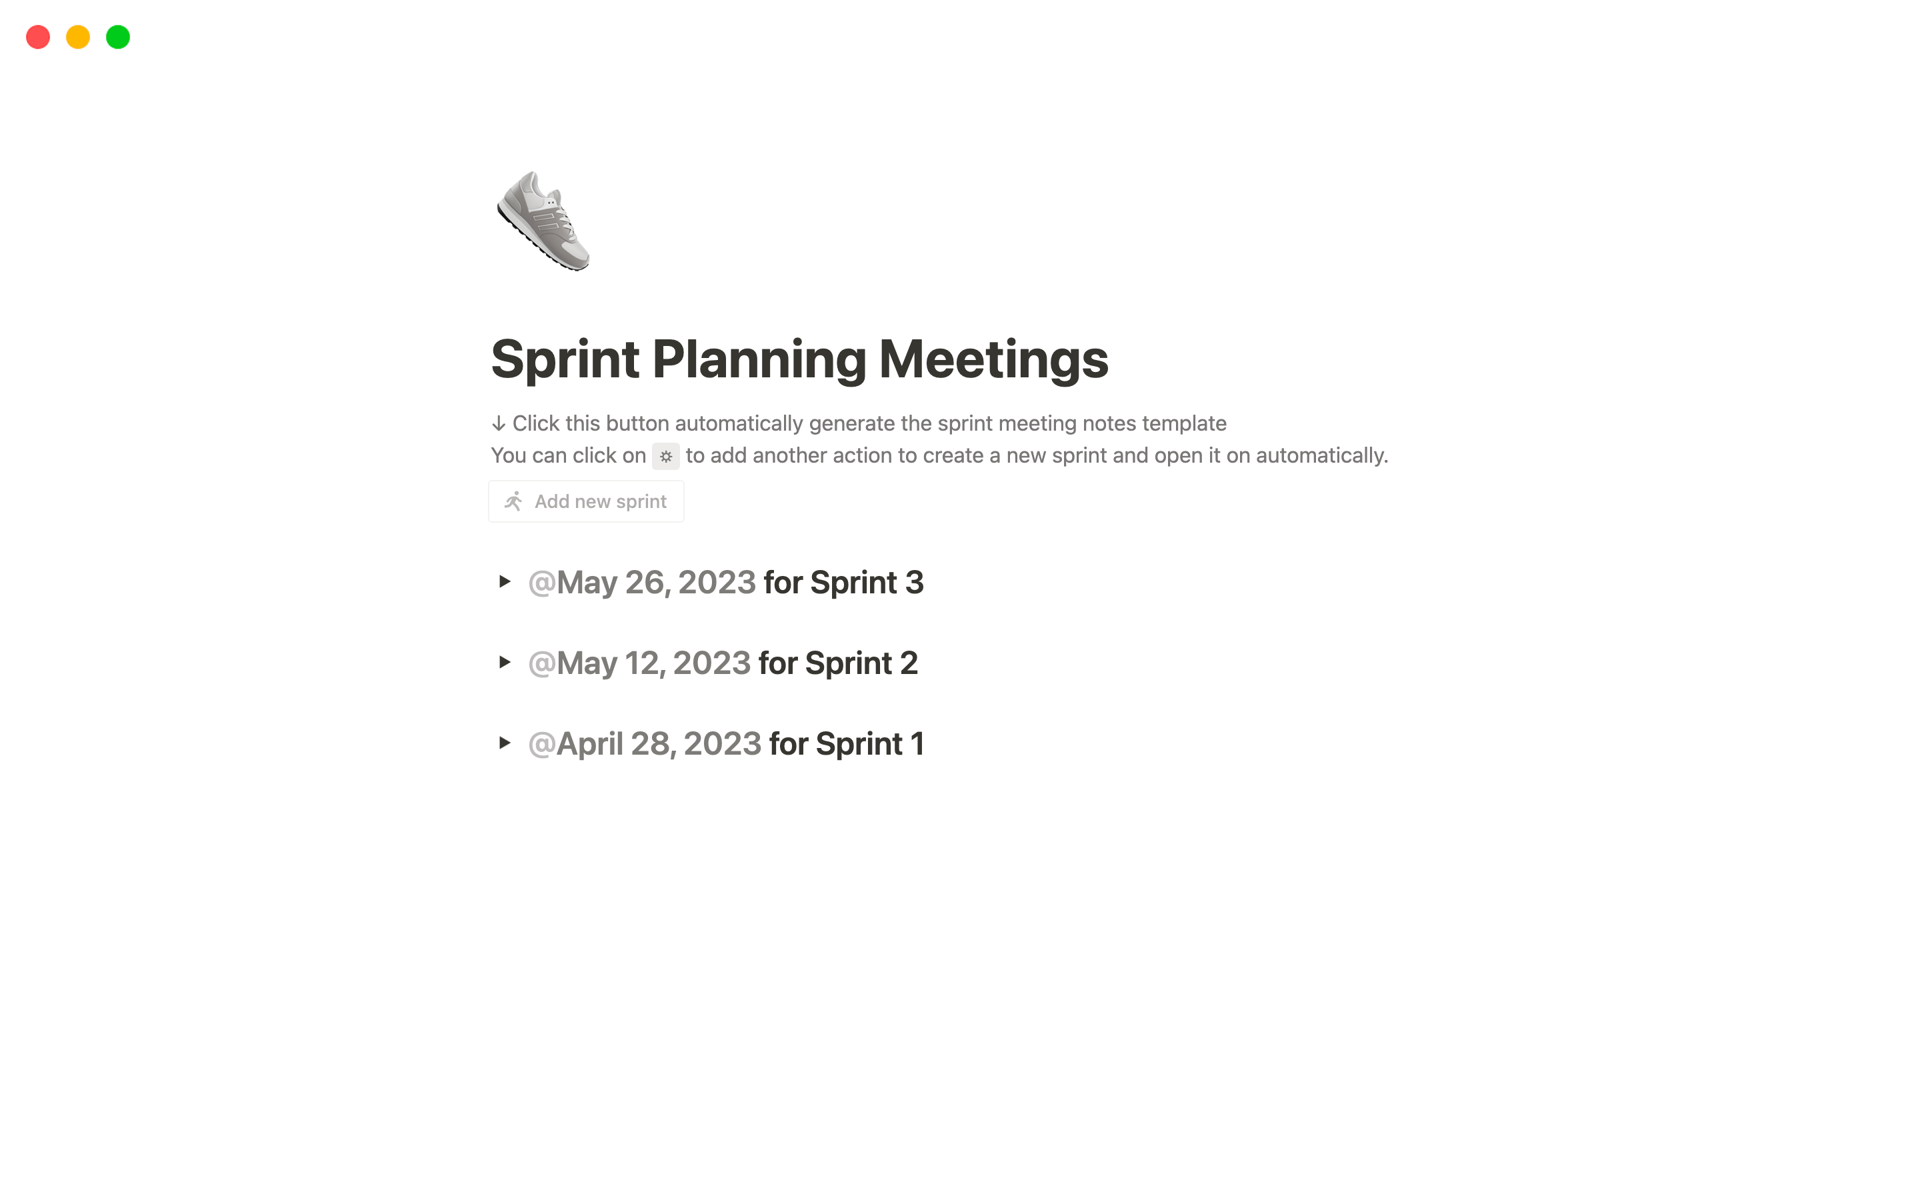 Simplify your sprint planning process with our intuitive Sprint Planning Meetings template.